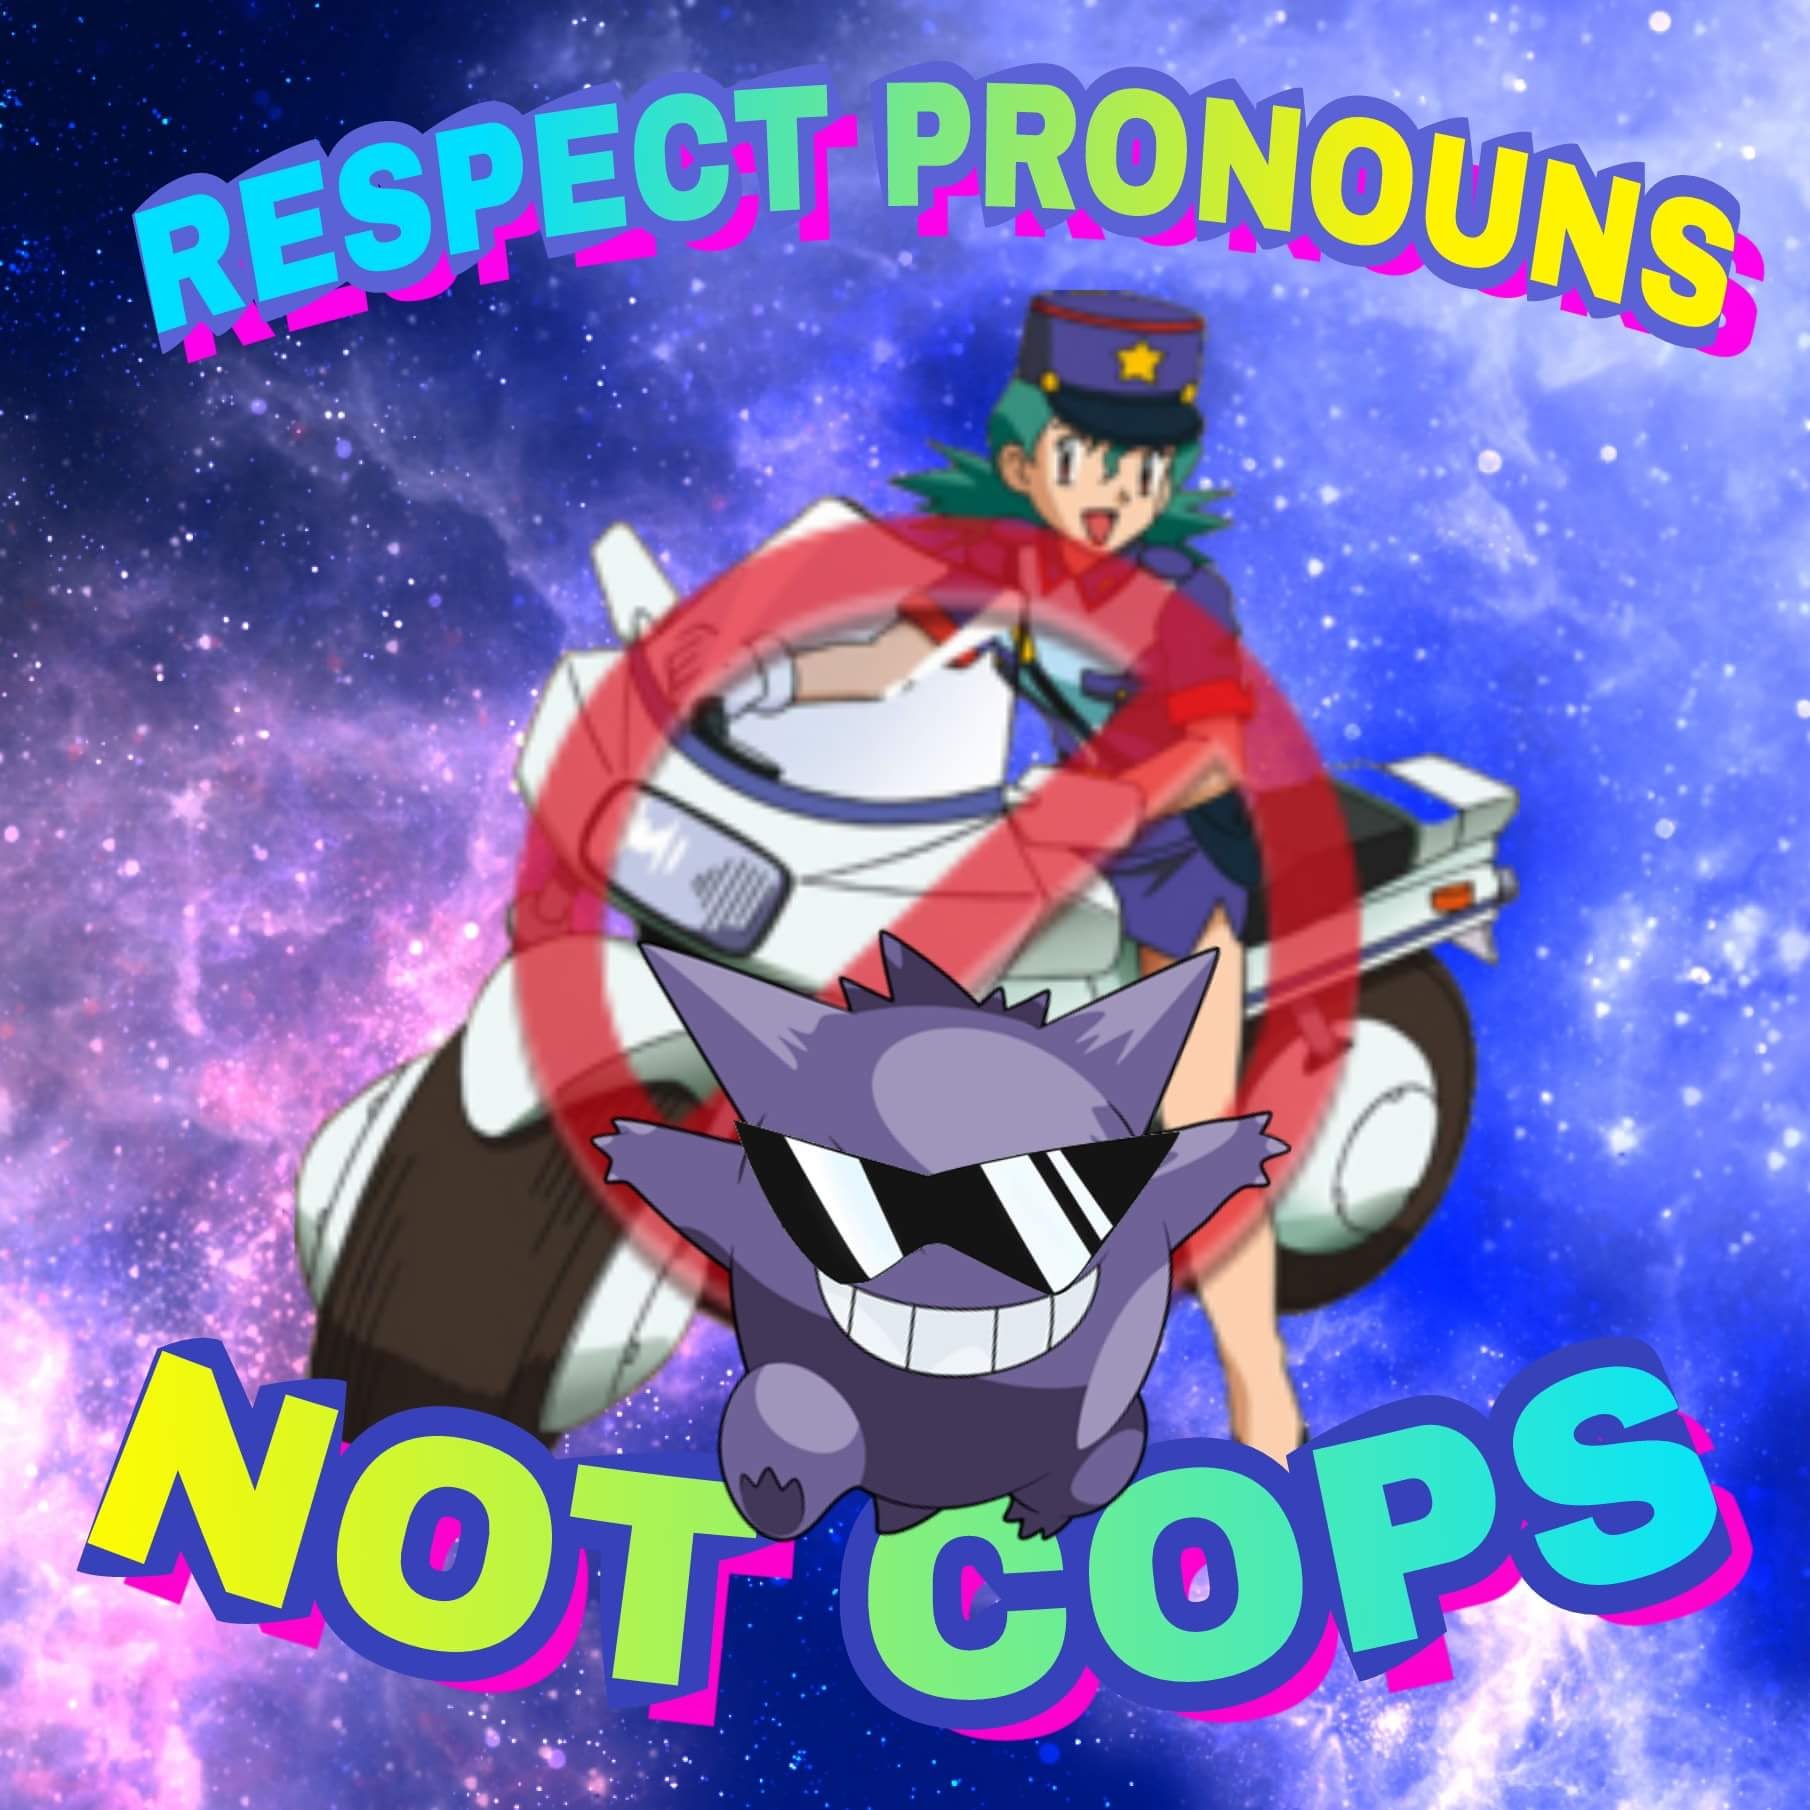 meme reads "respect pronouns not cops" with images of Officer Jenny and Gengar in sunglasses, both from Pokemon